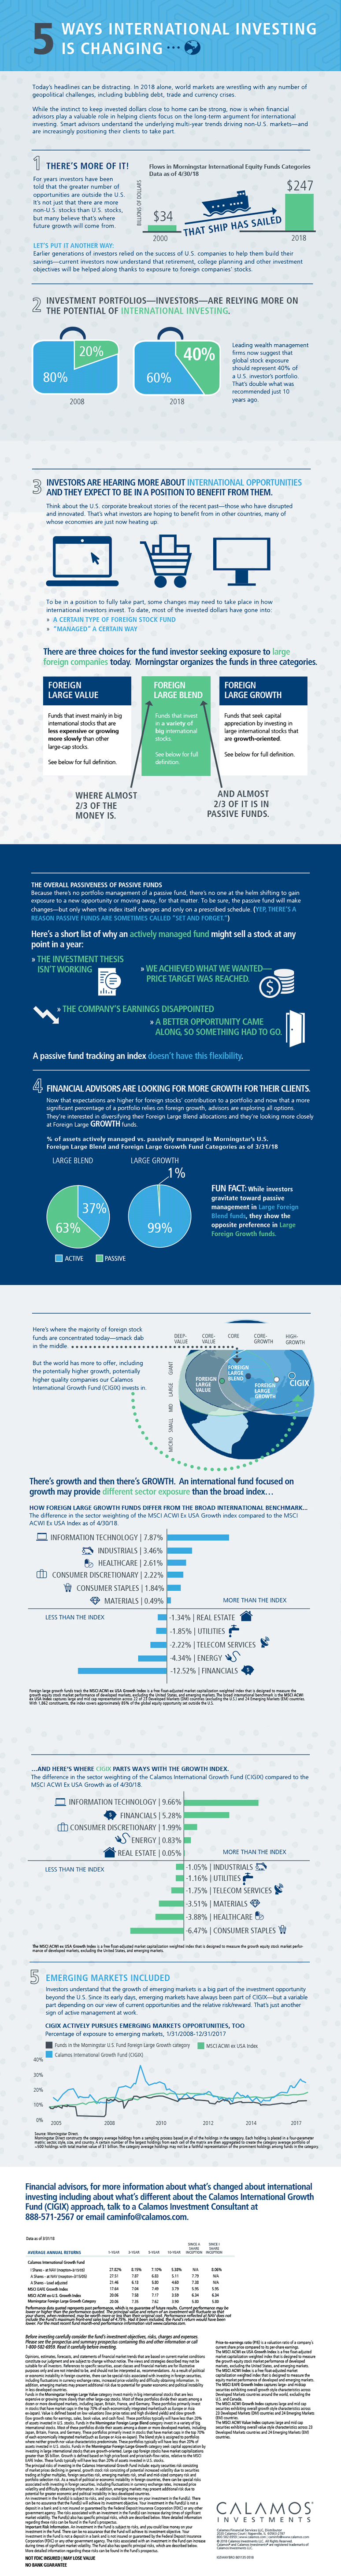 5 ways international investing has changed infographic